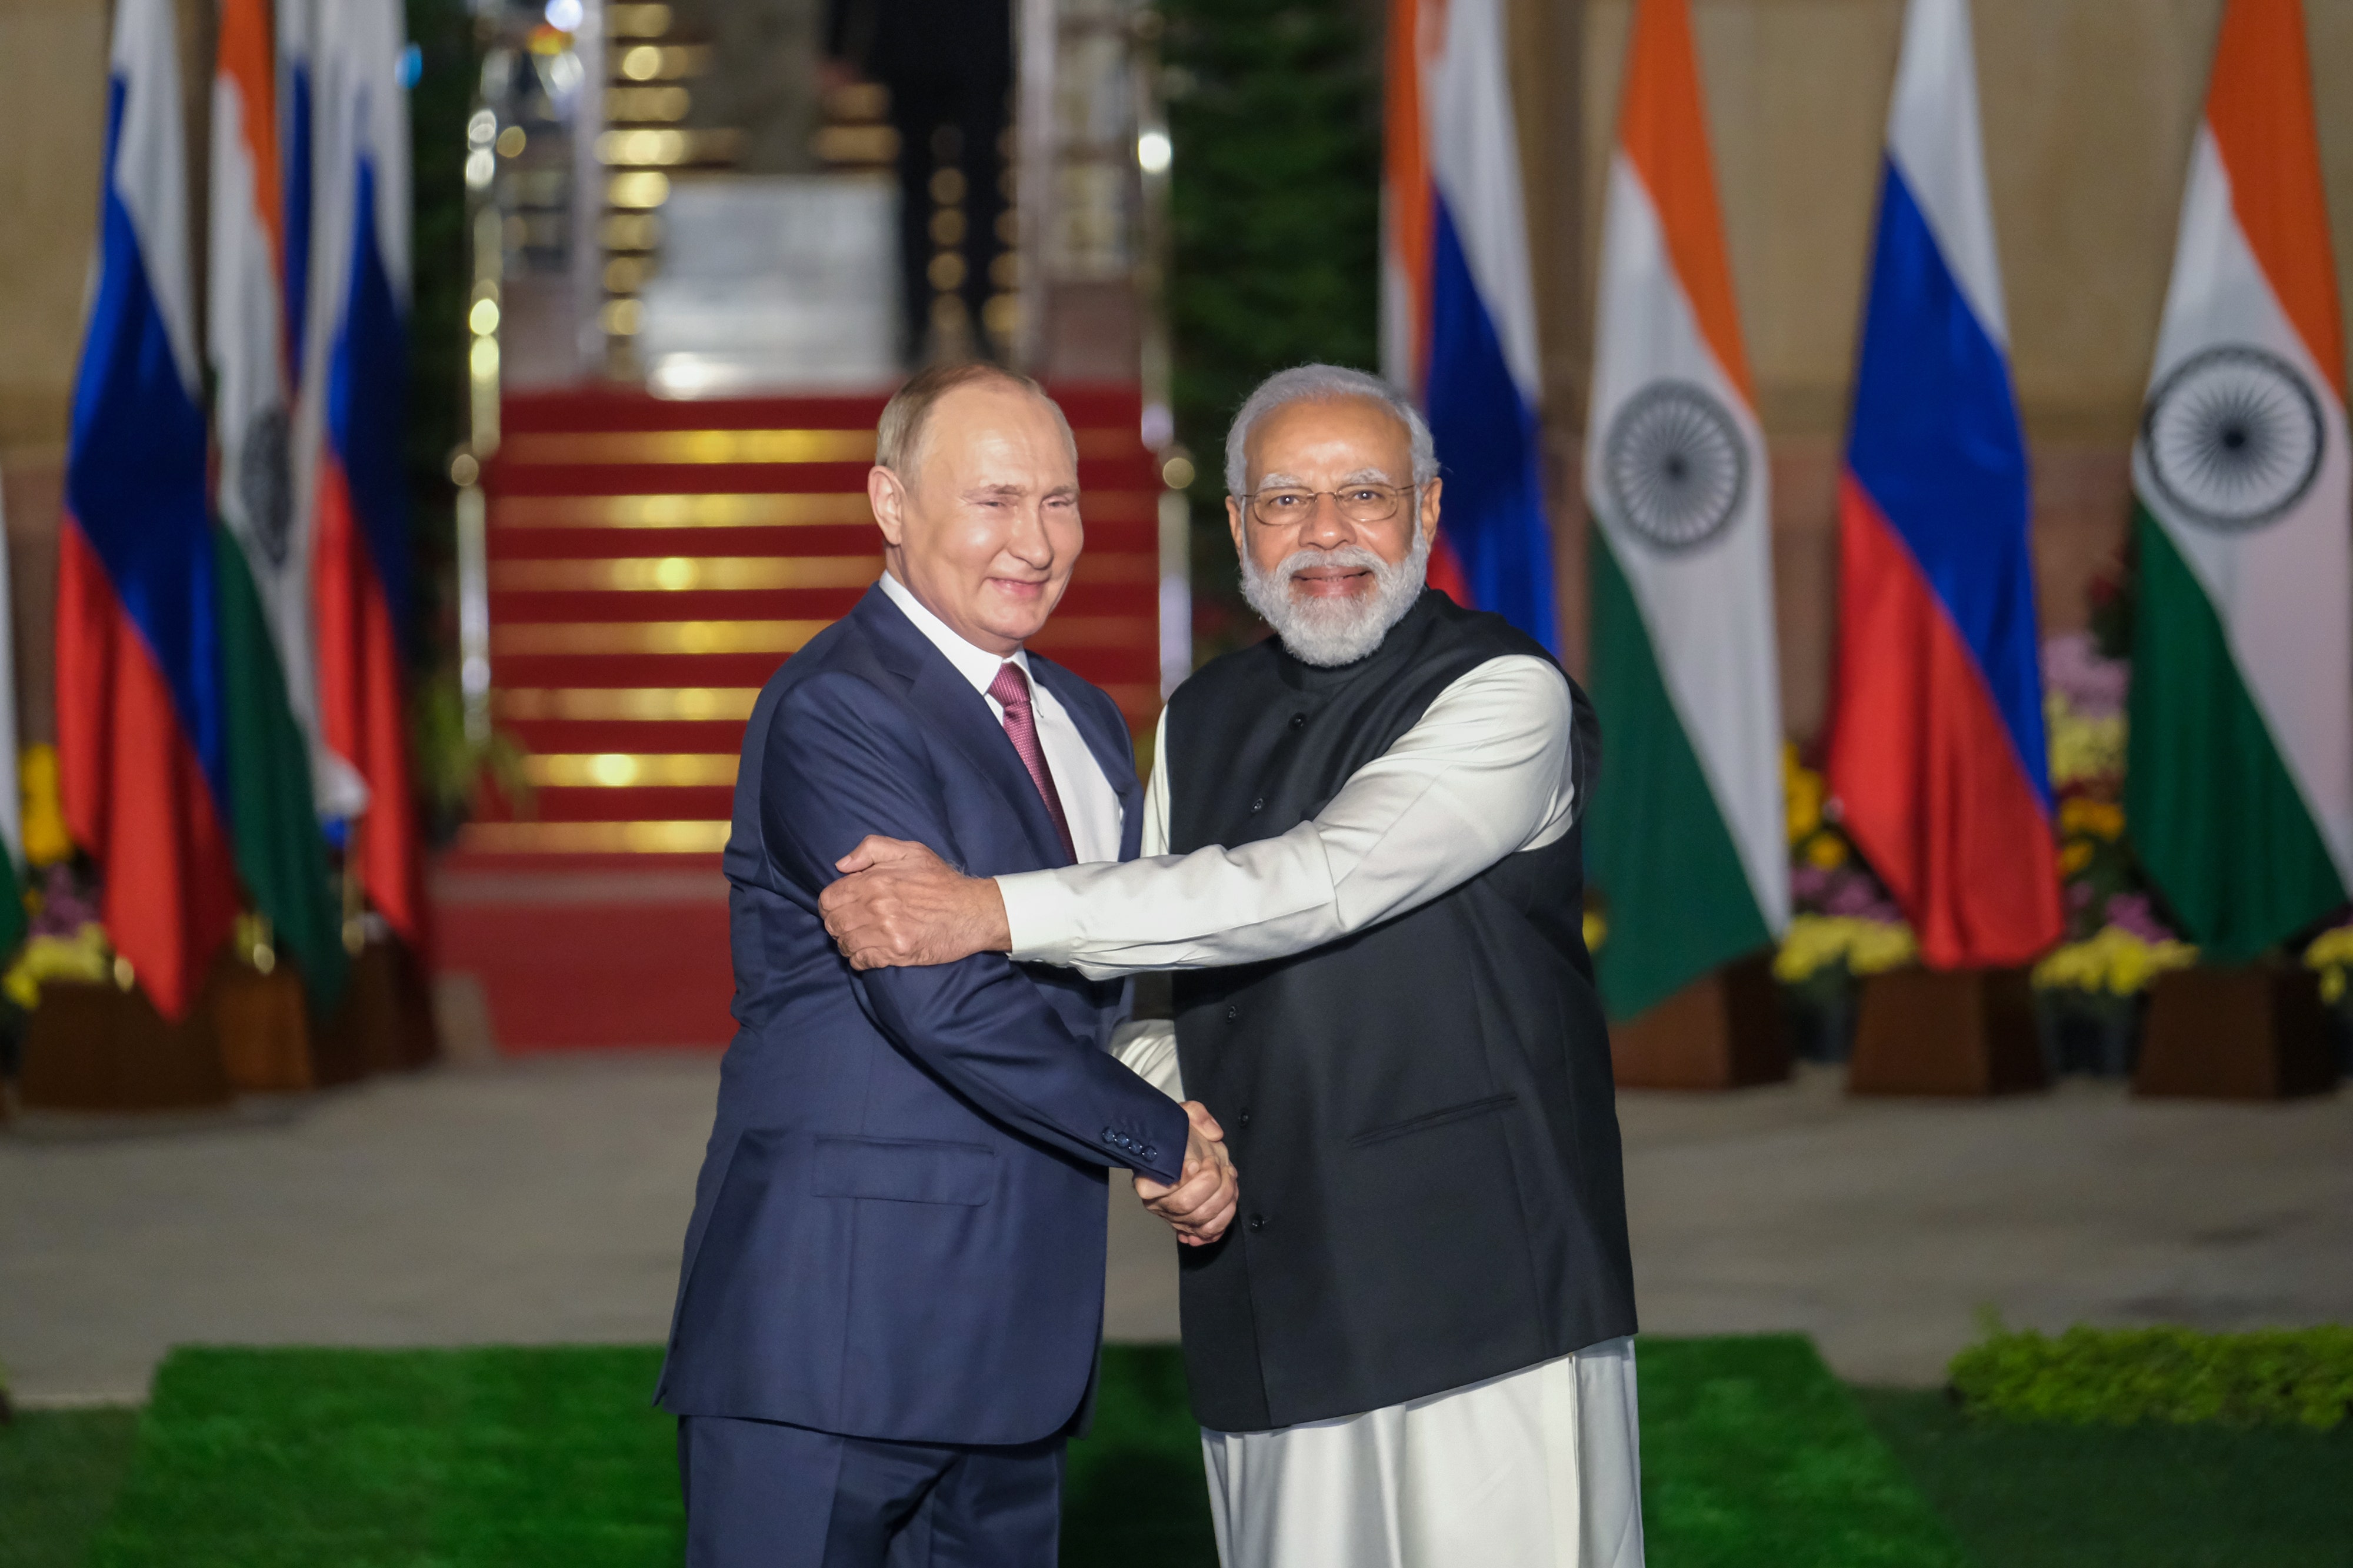 India, facing China concerns, abstained from UN resolution to appease Russia: foreign policy expert